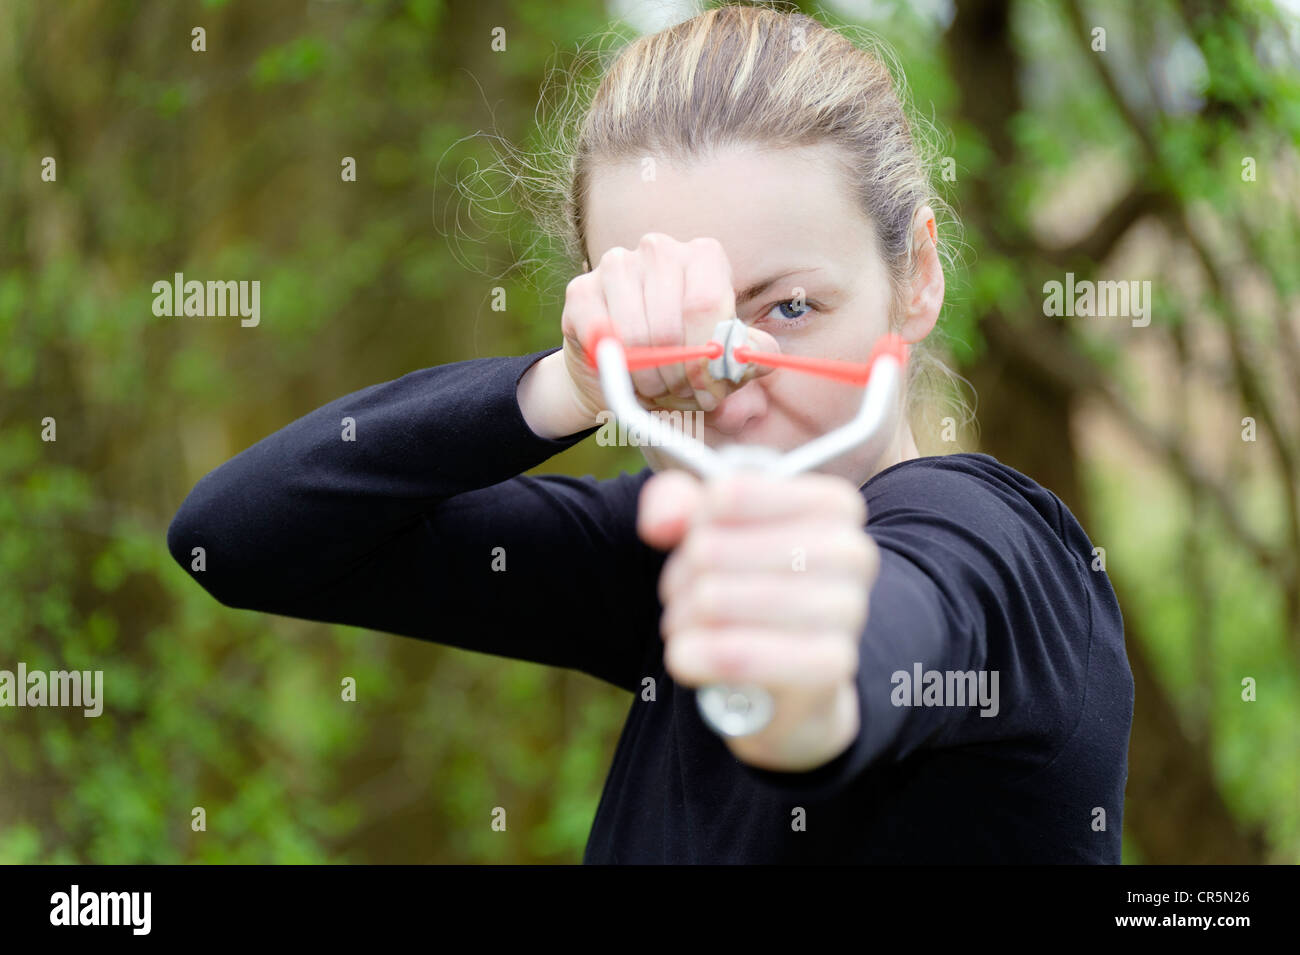 Young woman aiming a catapult, slingshot Stock Photo